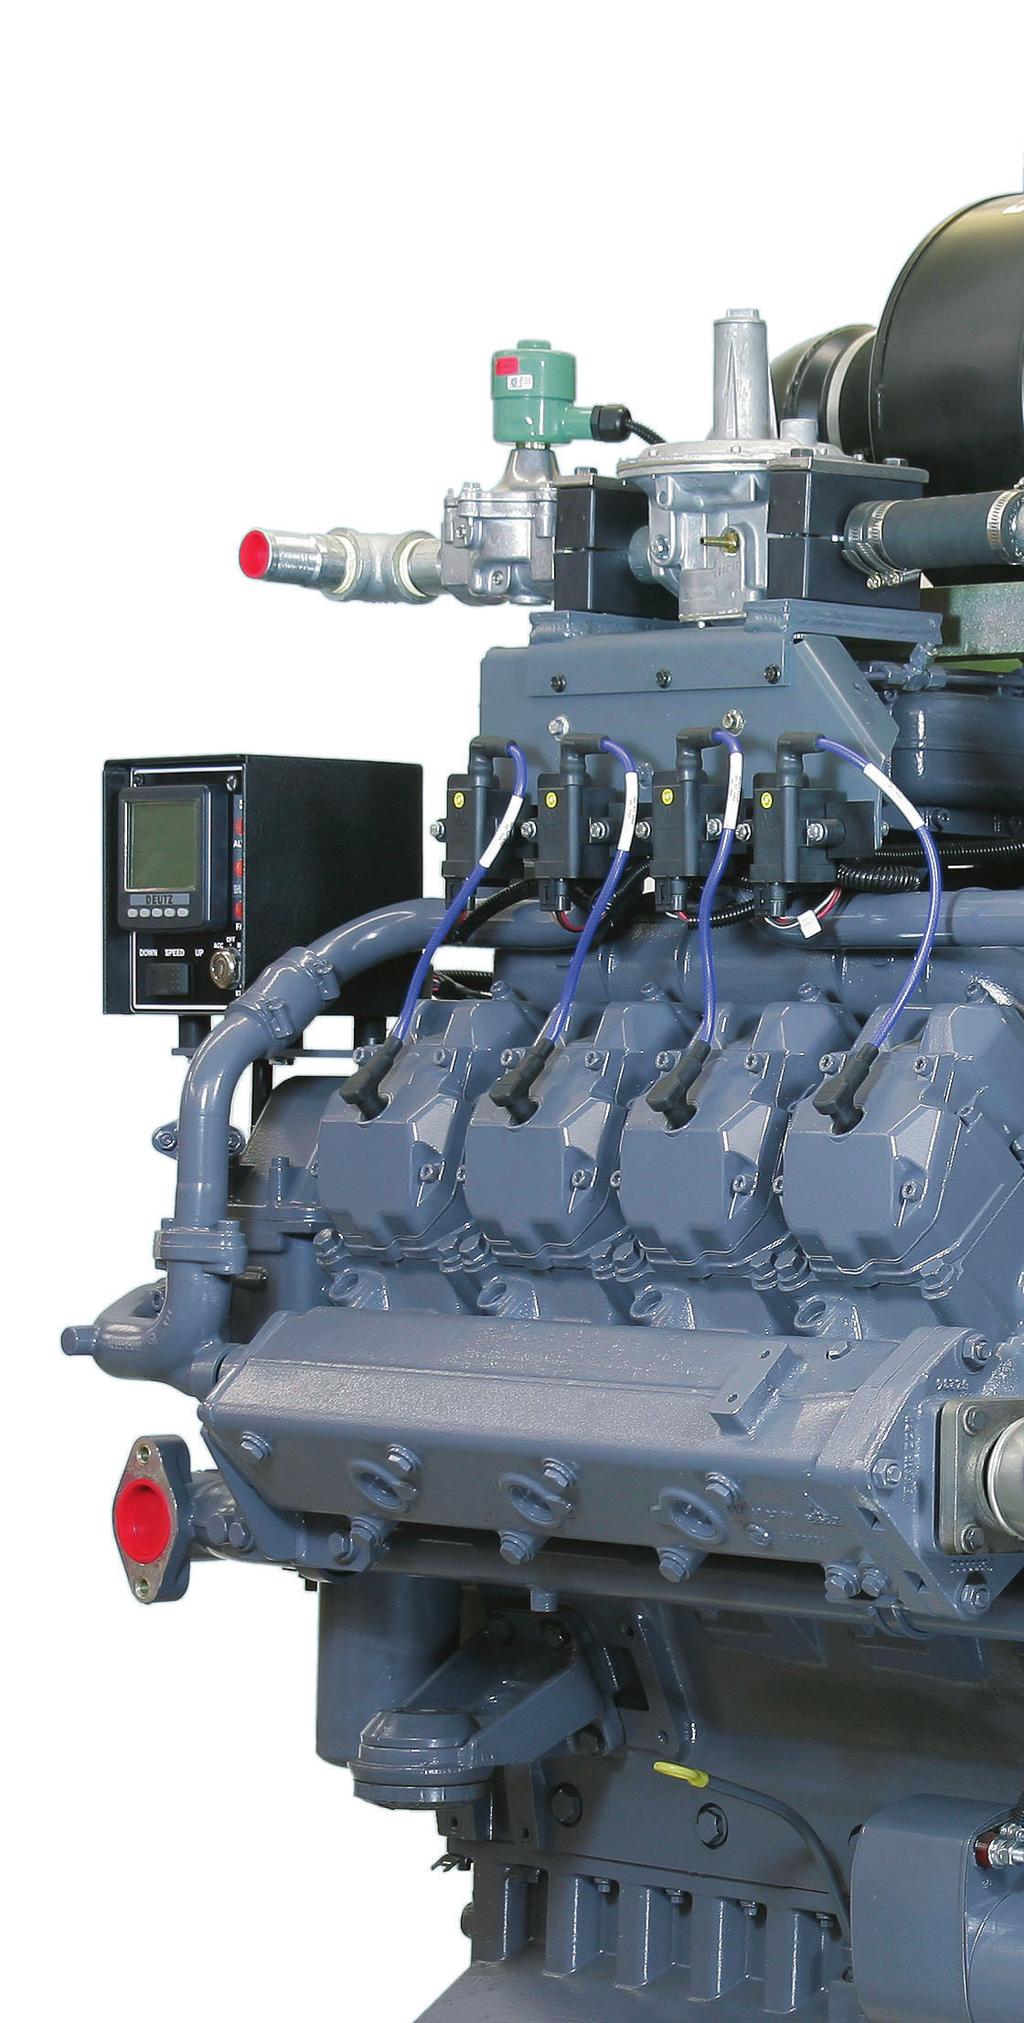 The Power Unit consists of: Basic engine 24 volt electric starter with charging alternator Completely assembled and wired ignition system Solid-state engine controller Programmable speed controller